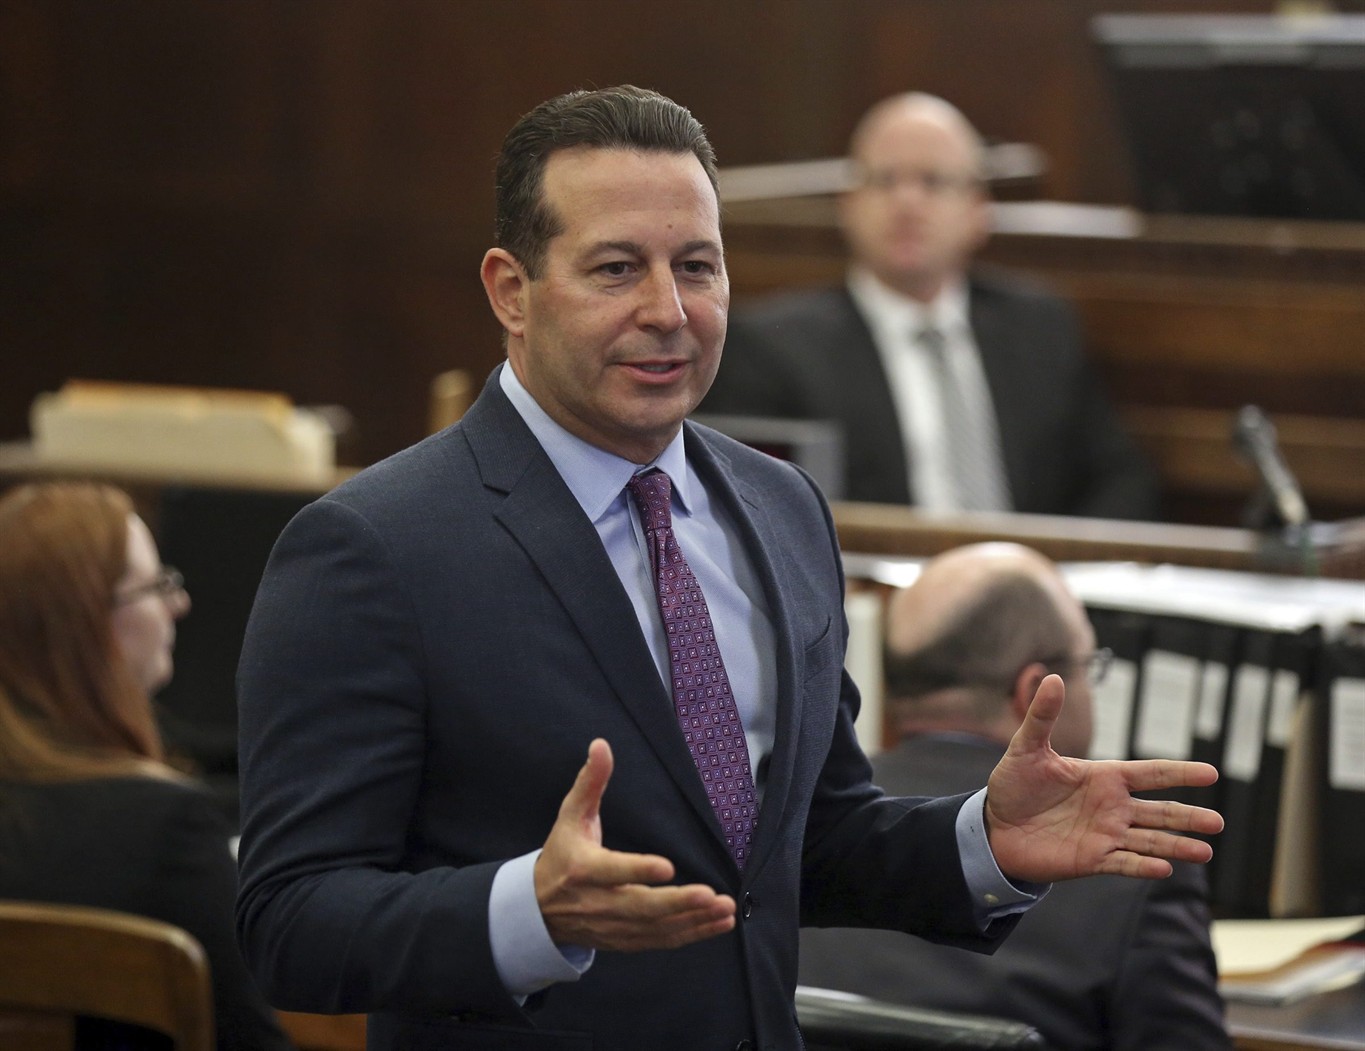 Defense attorney Jose Baez addresses the jury before leaving for the "...